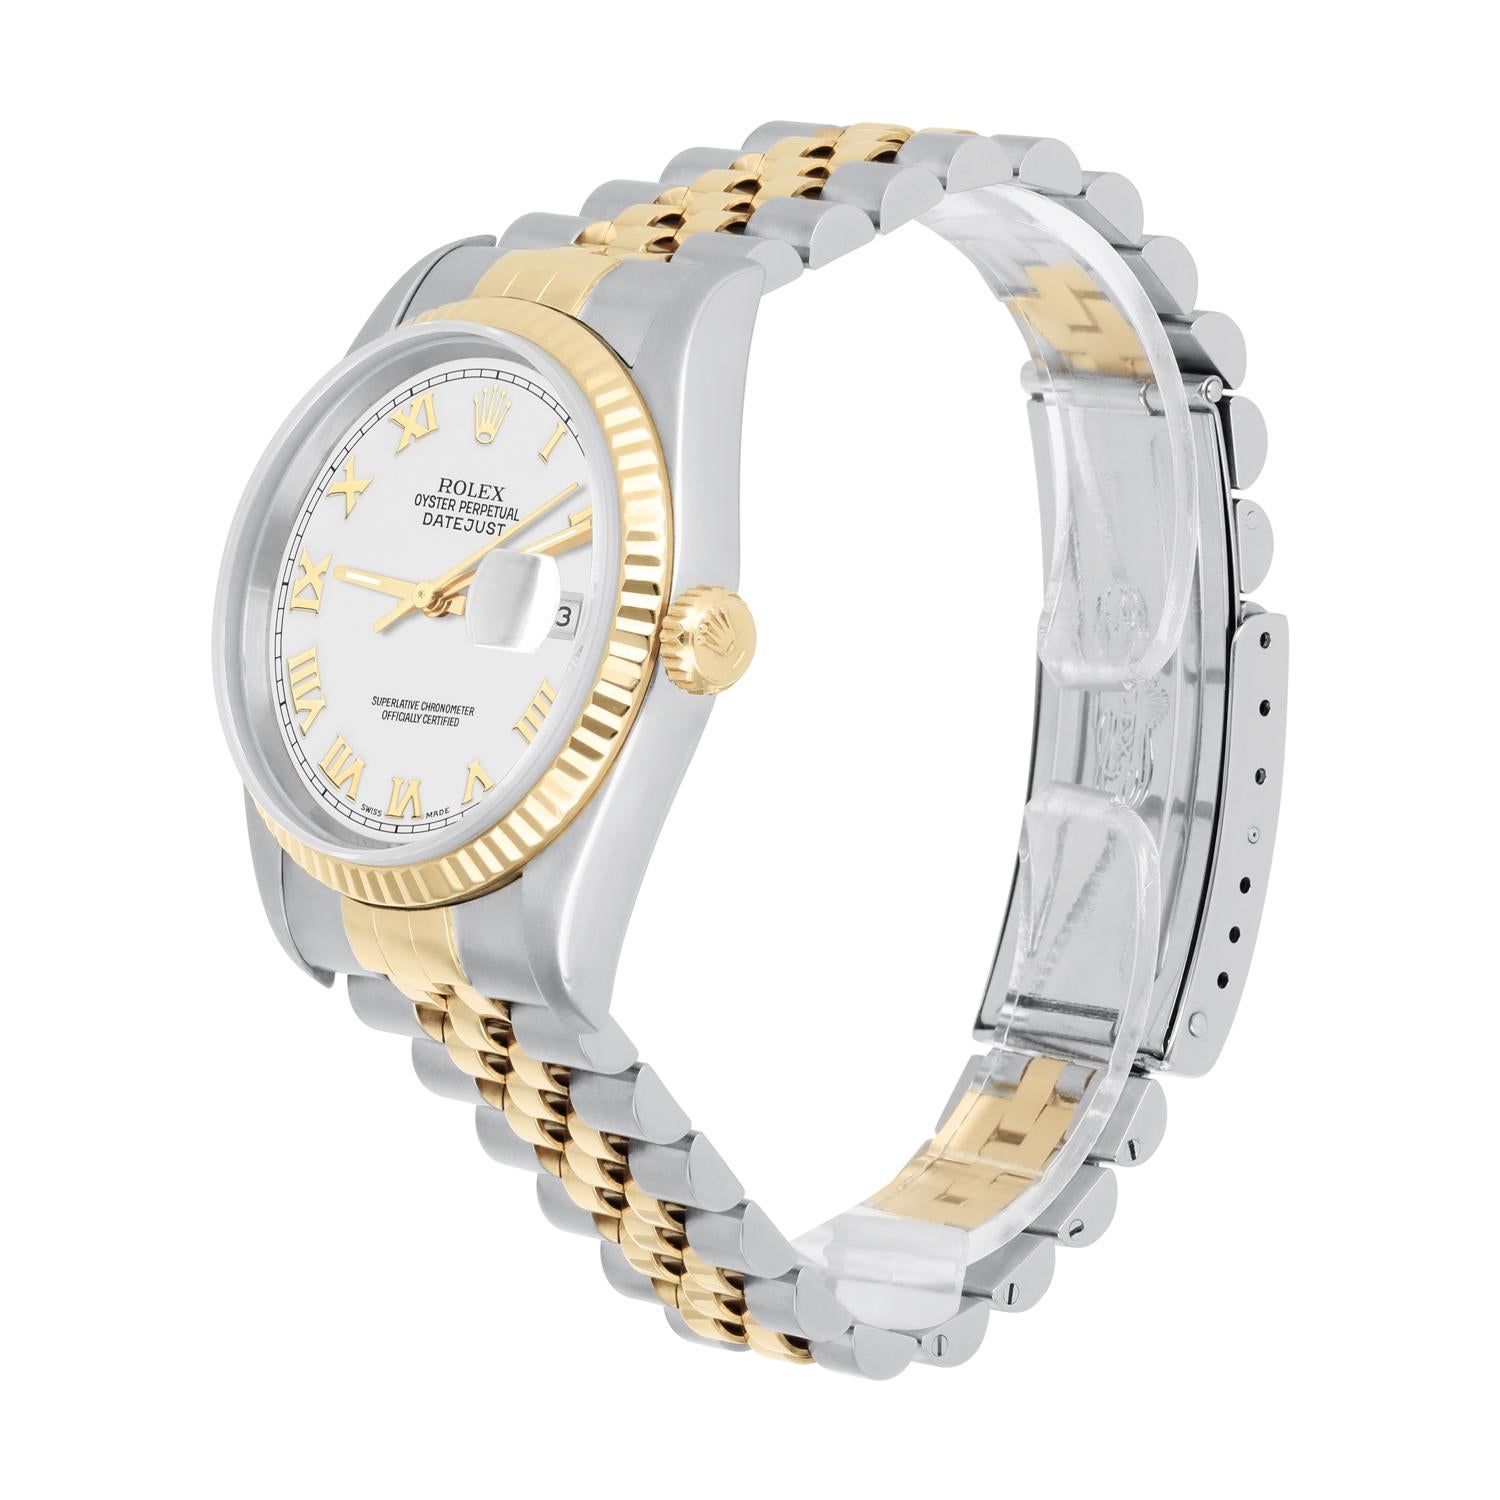 Modern Rolex Datejust 36mm Two Tone White Roman Dial Jubilee 16233 Circa 1997 For Sale